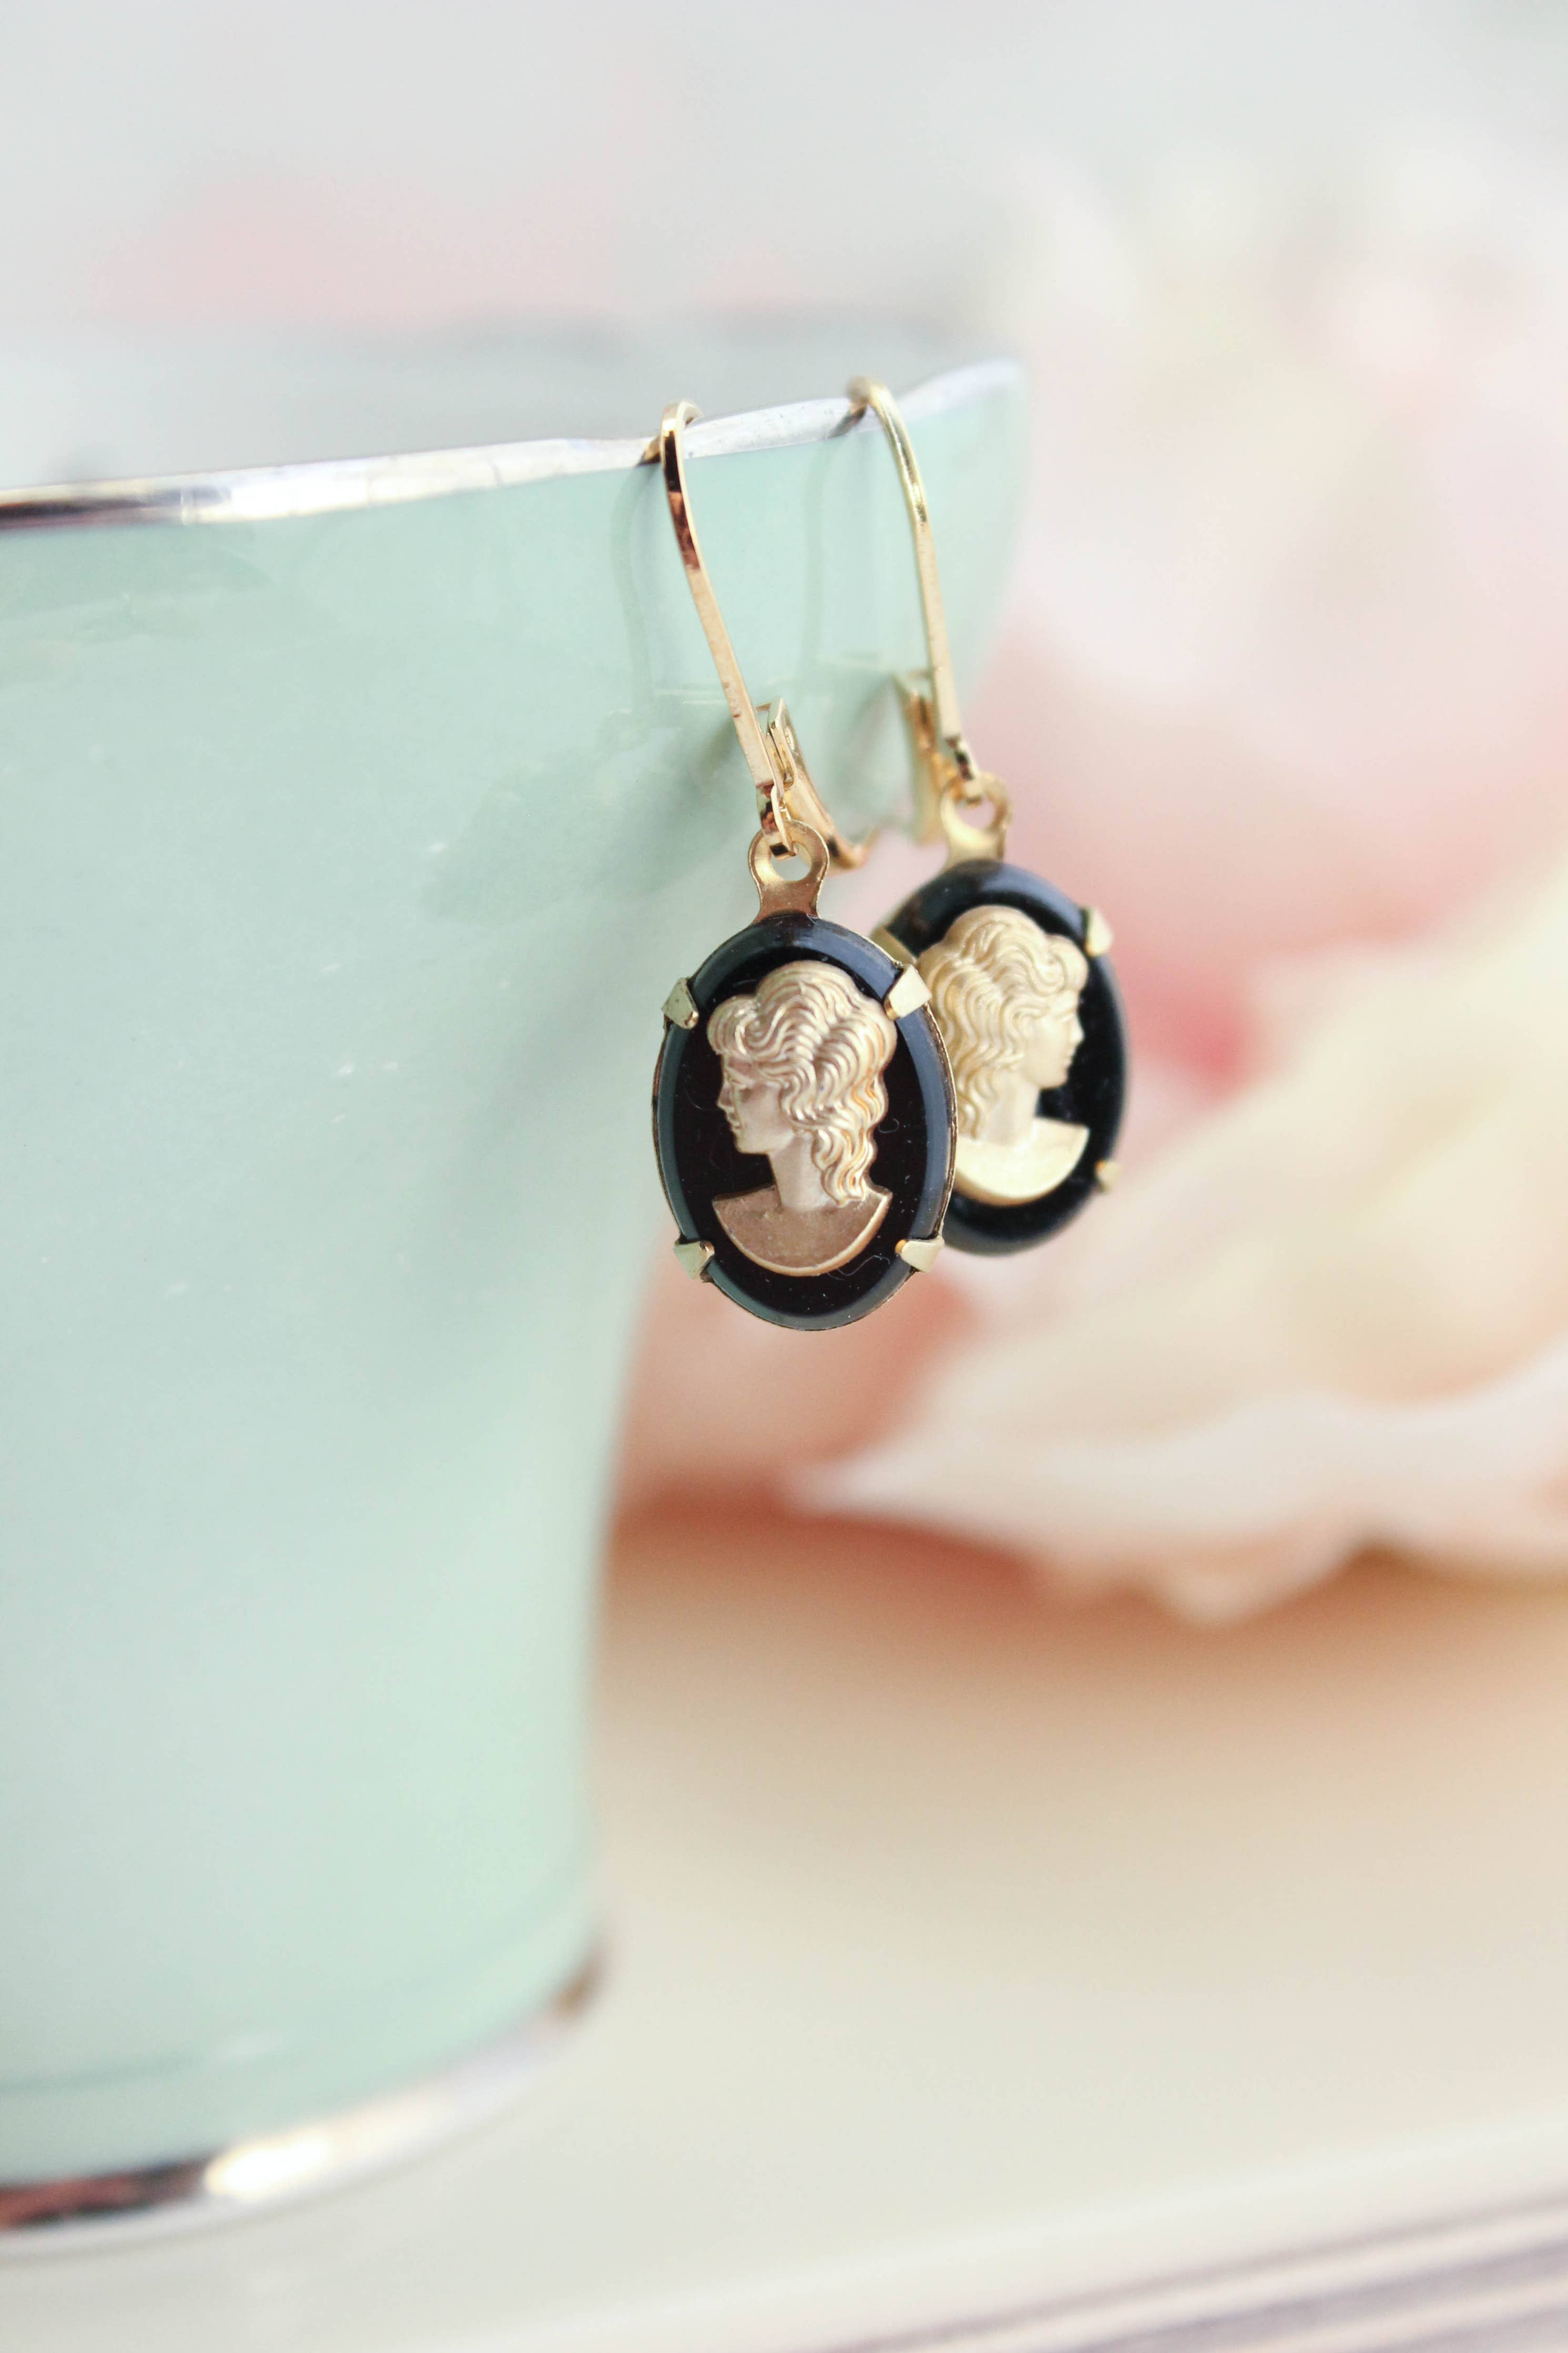 Black and Gold Lady Cameo Earrings - Out of the Blue